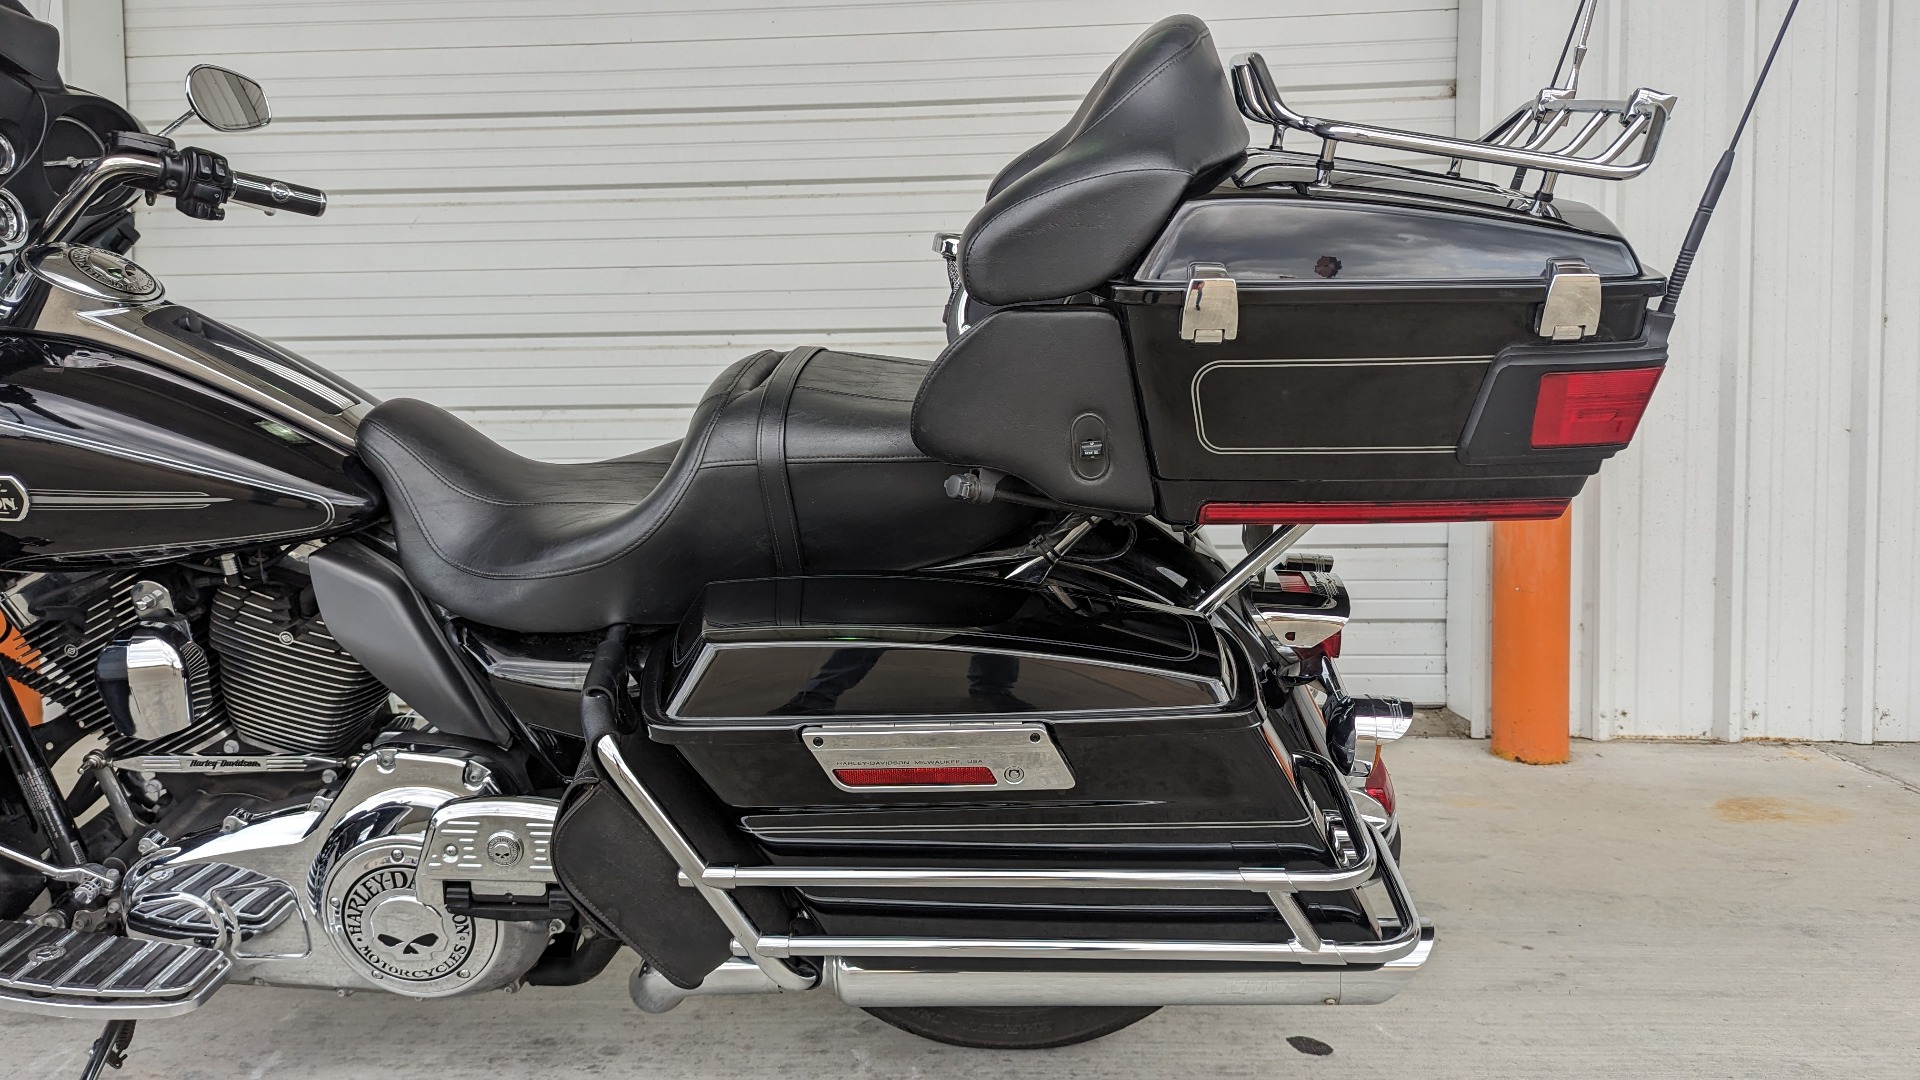 2013 harley davidson ultra classic electra glide for sale in mississippi - Photo 8